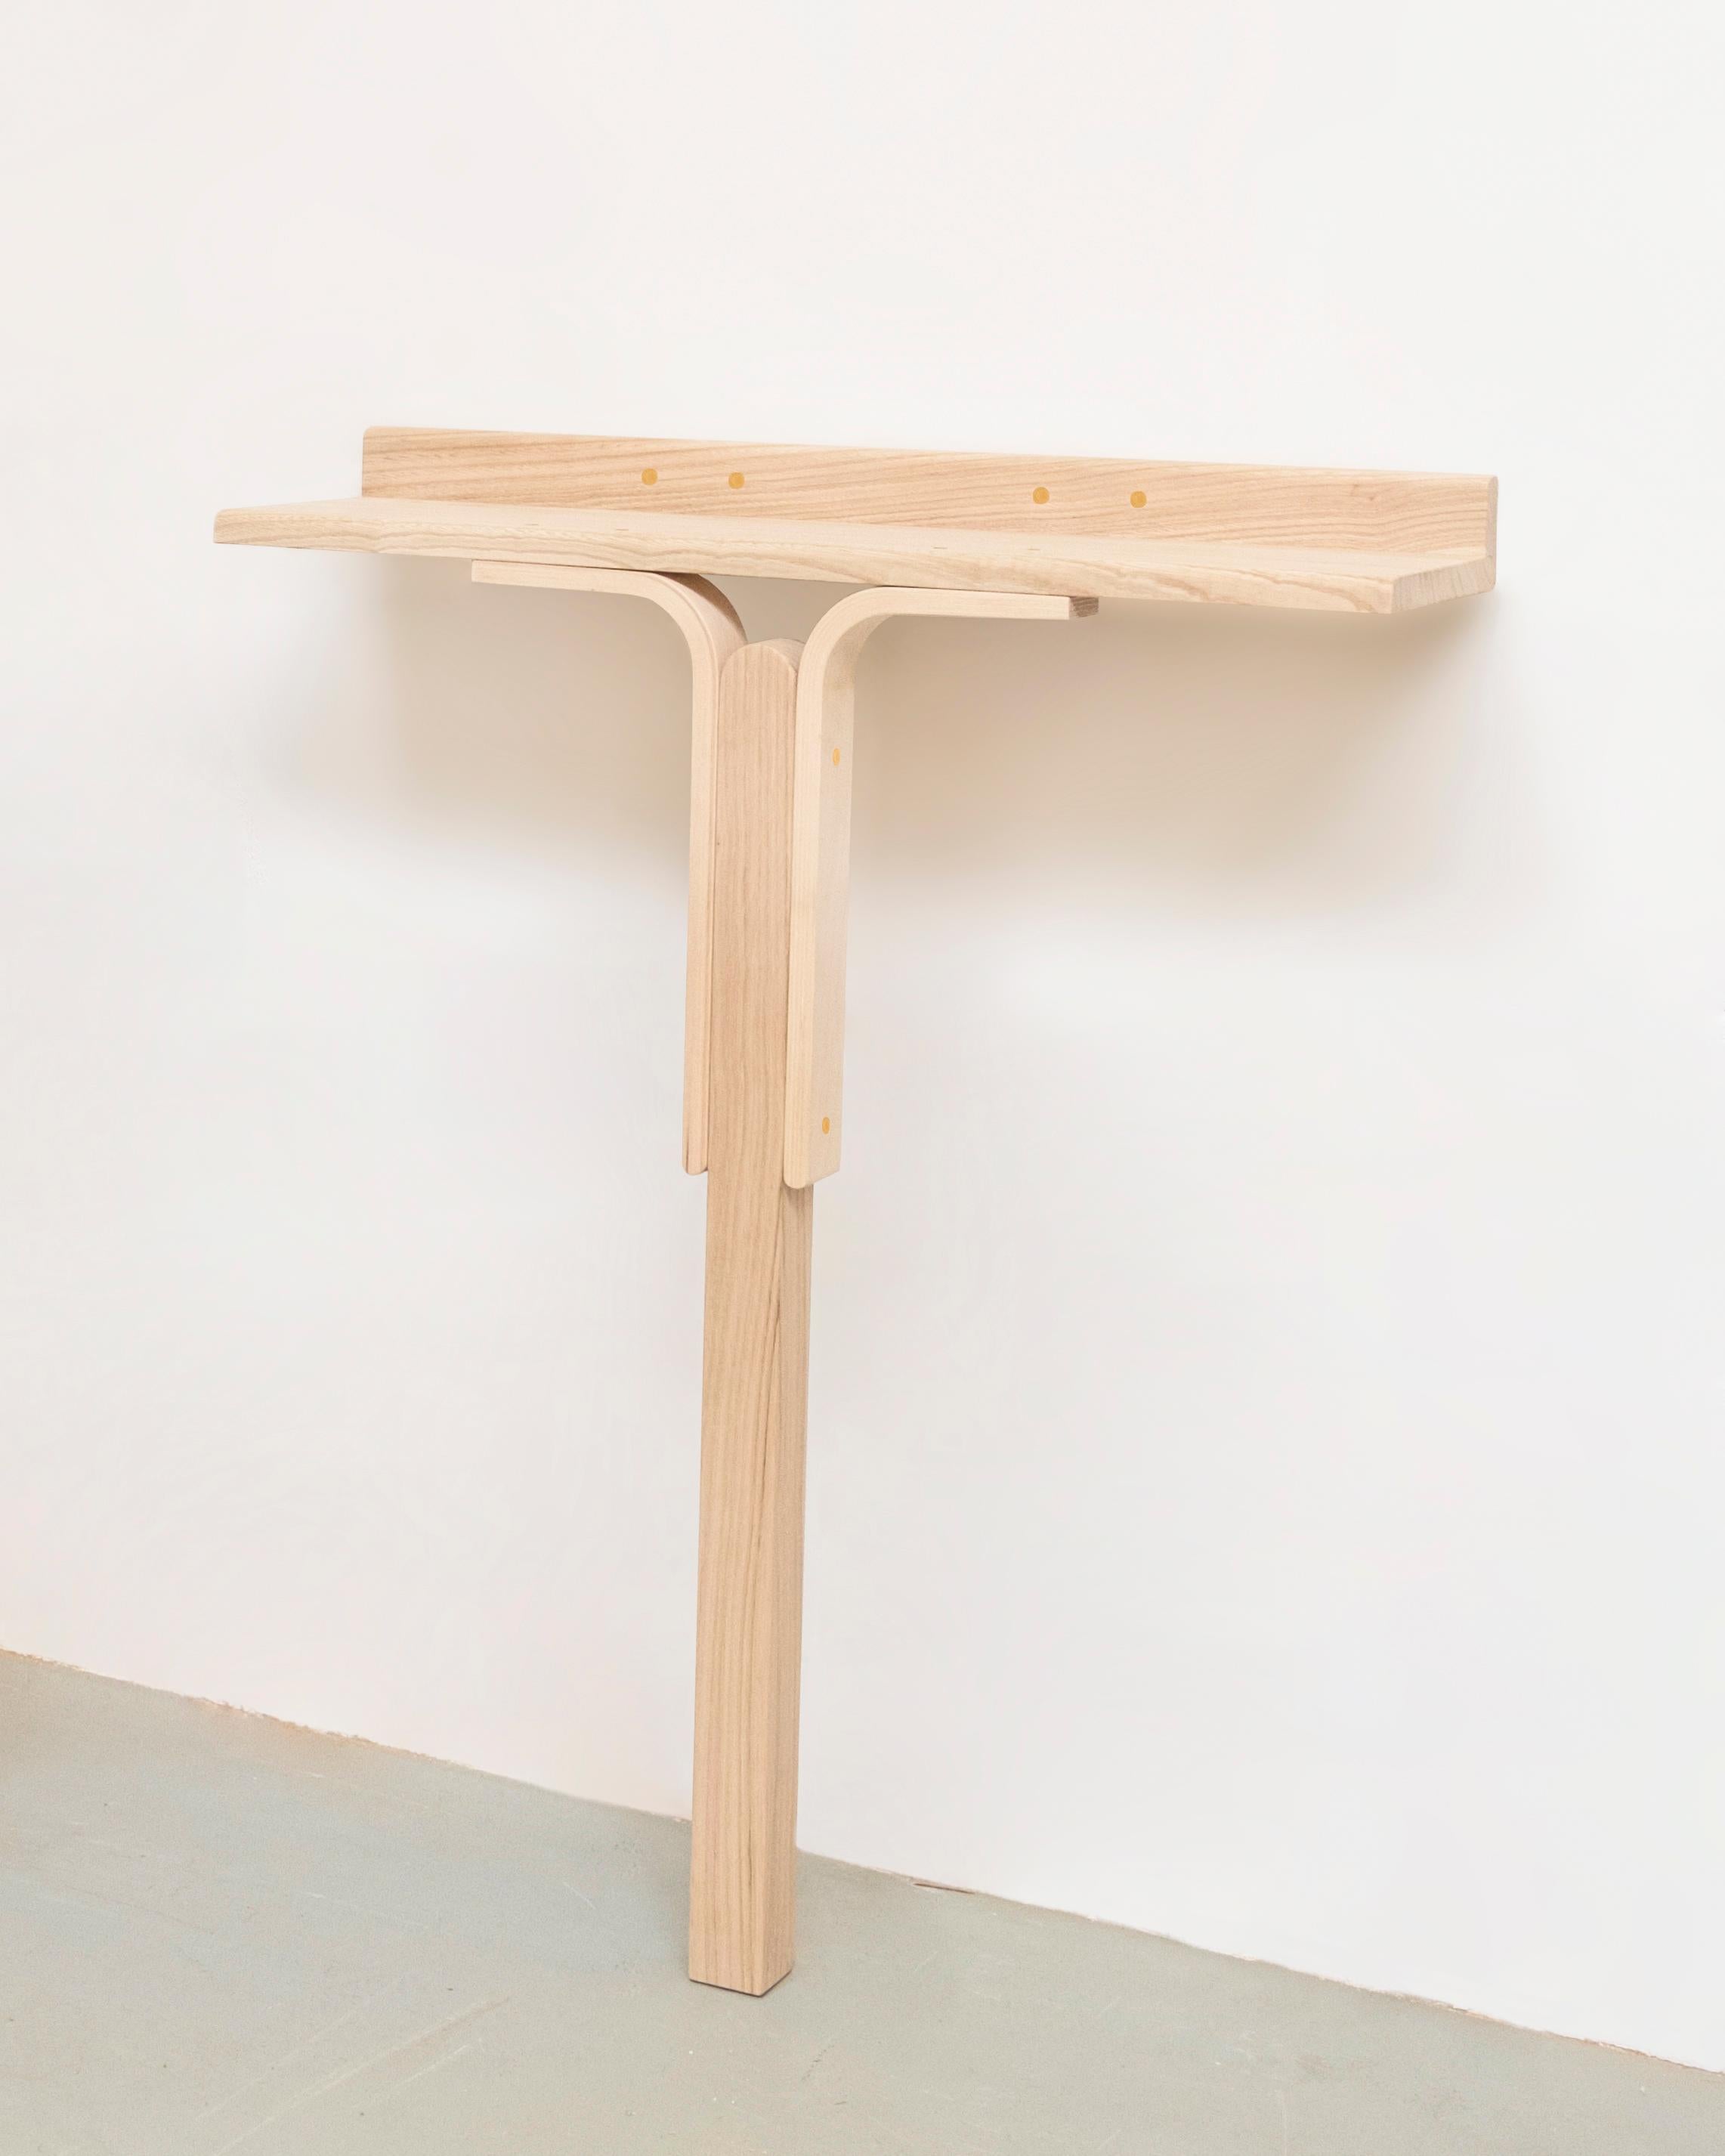 21st Century, Contemporary Wood Console Table Handmade in Italy by Ilabianchi (Art déco) im Angebot